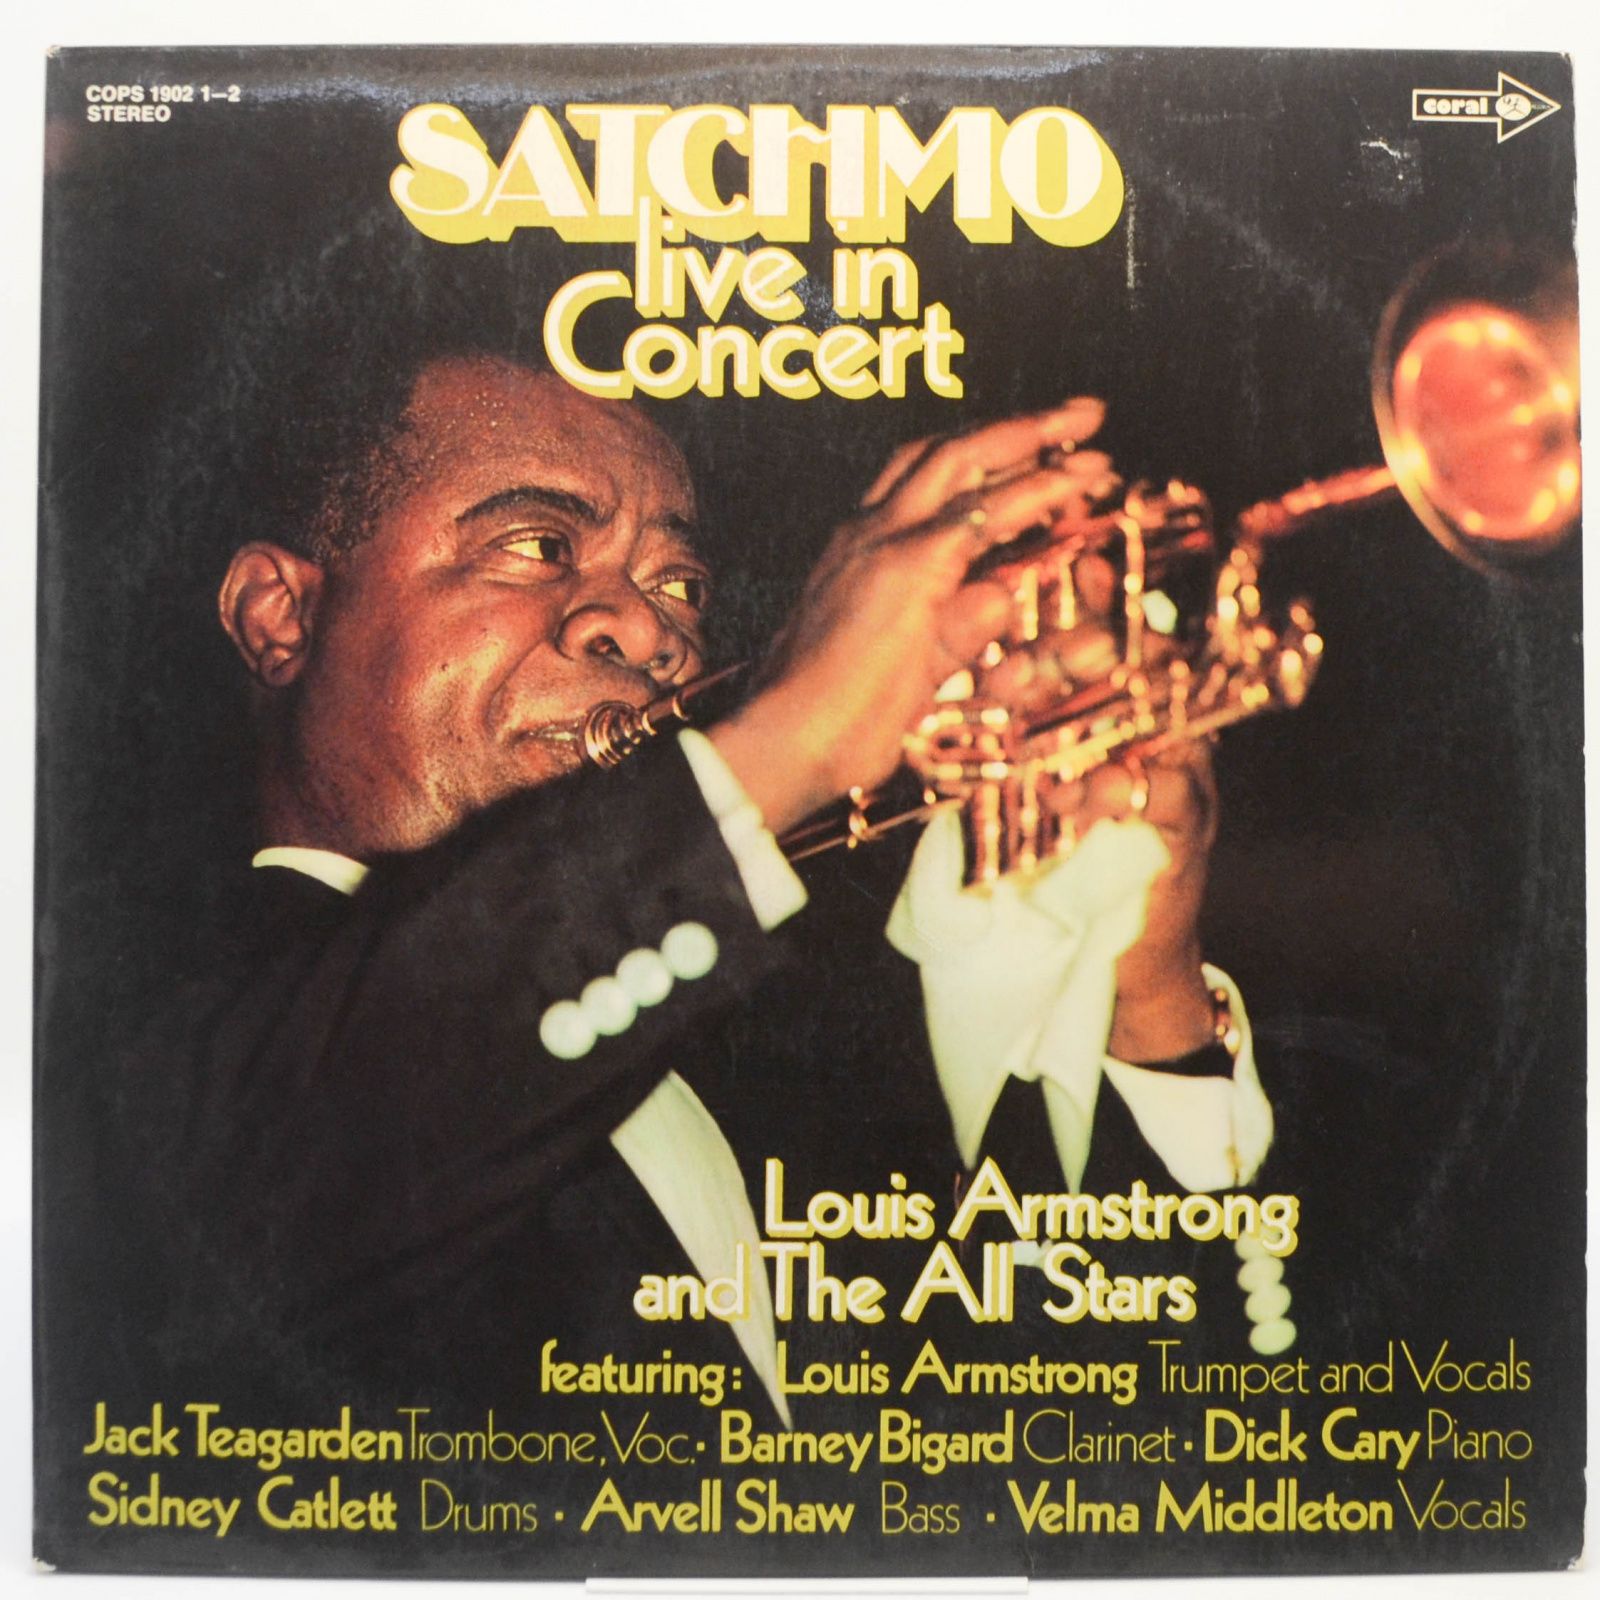 Louis Armstrong And The All Stars — Satchmo Live In Concert, 1951